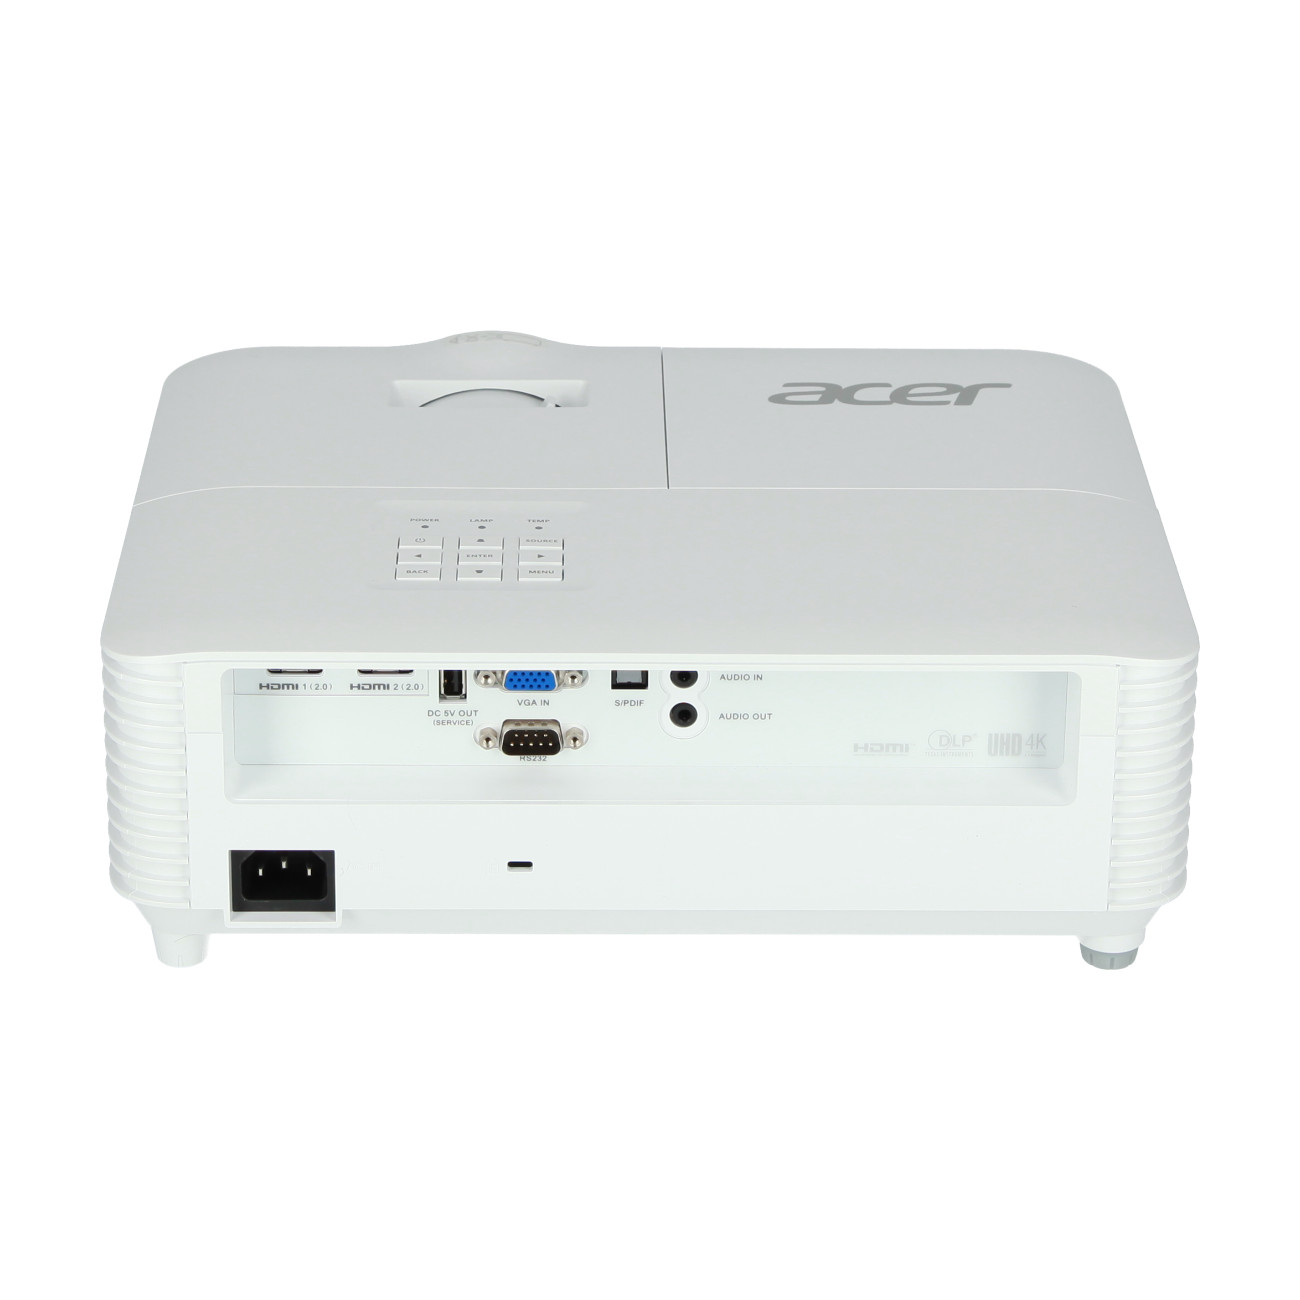 Acer-H6815ATV-Smart-met-Android-Box